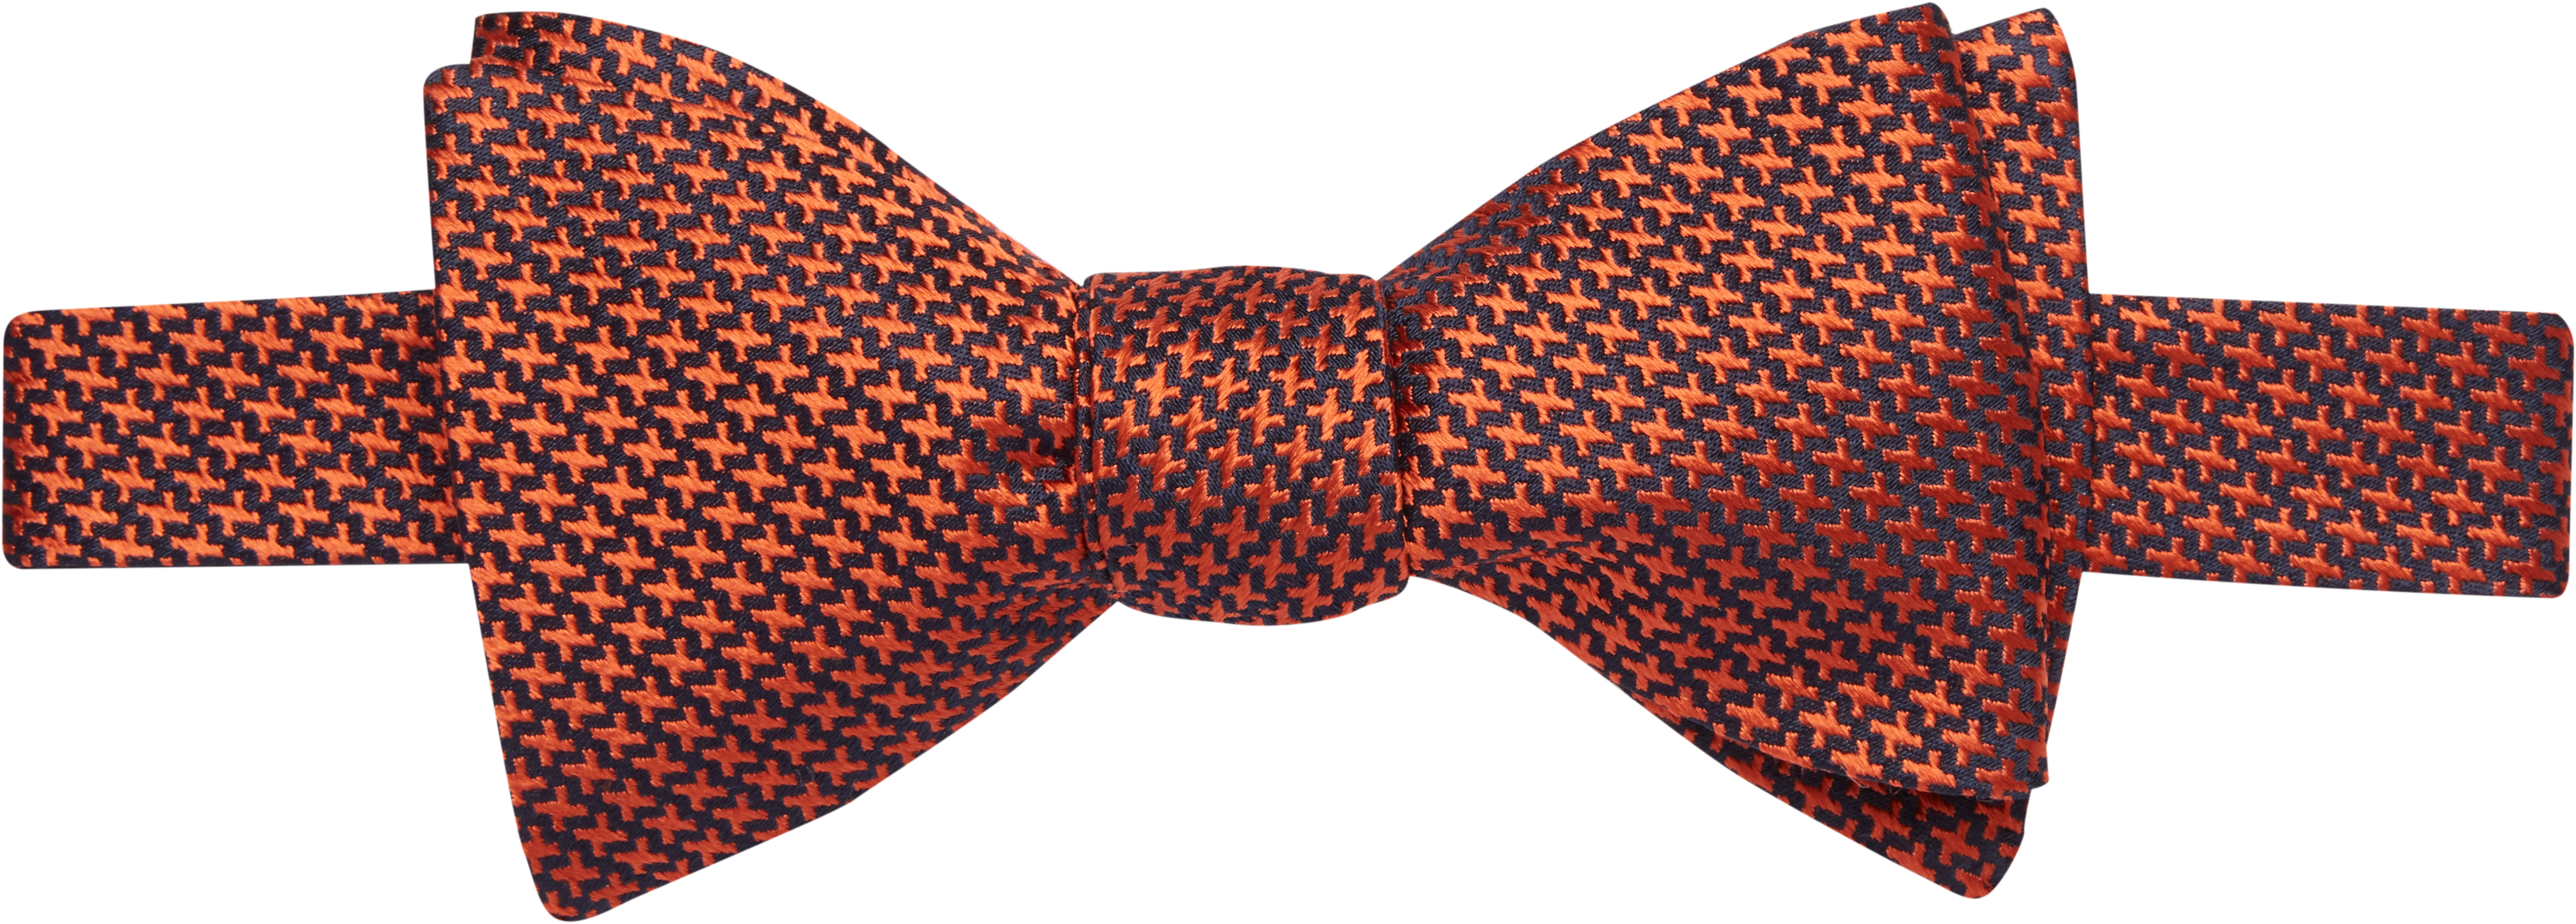 Jos. A. Bank Patterned Self-Tie Bow Tie CLEARANCE - All Clearance | Jos ...